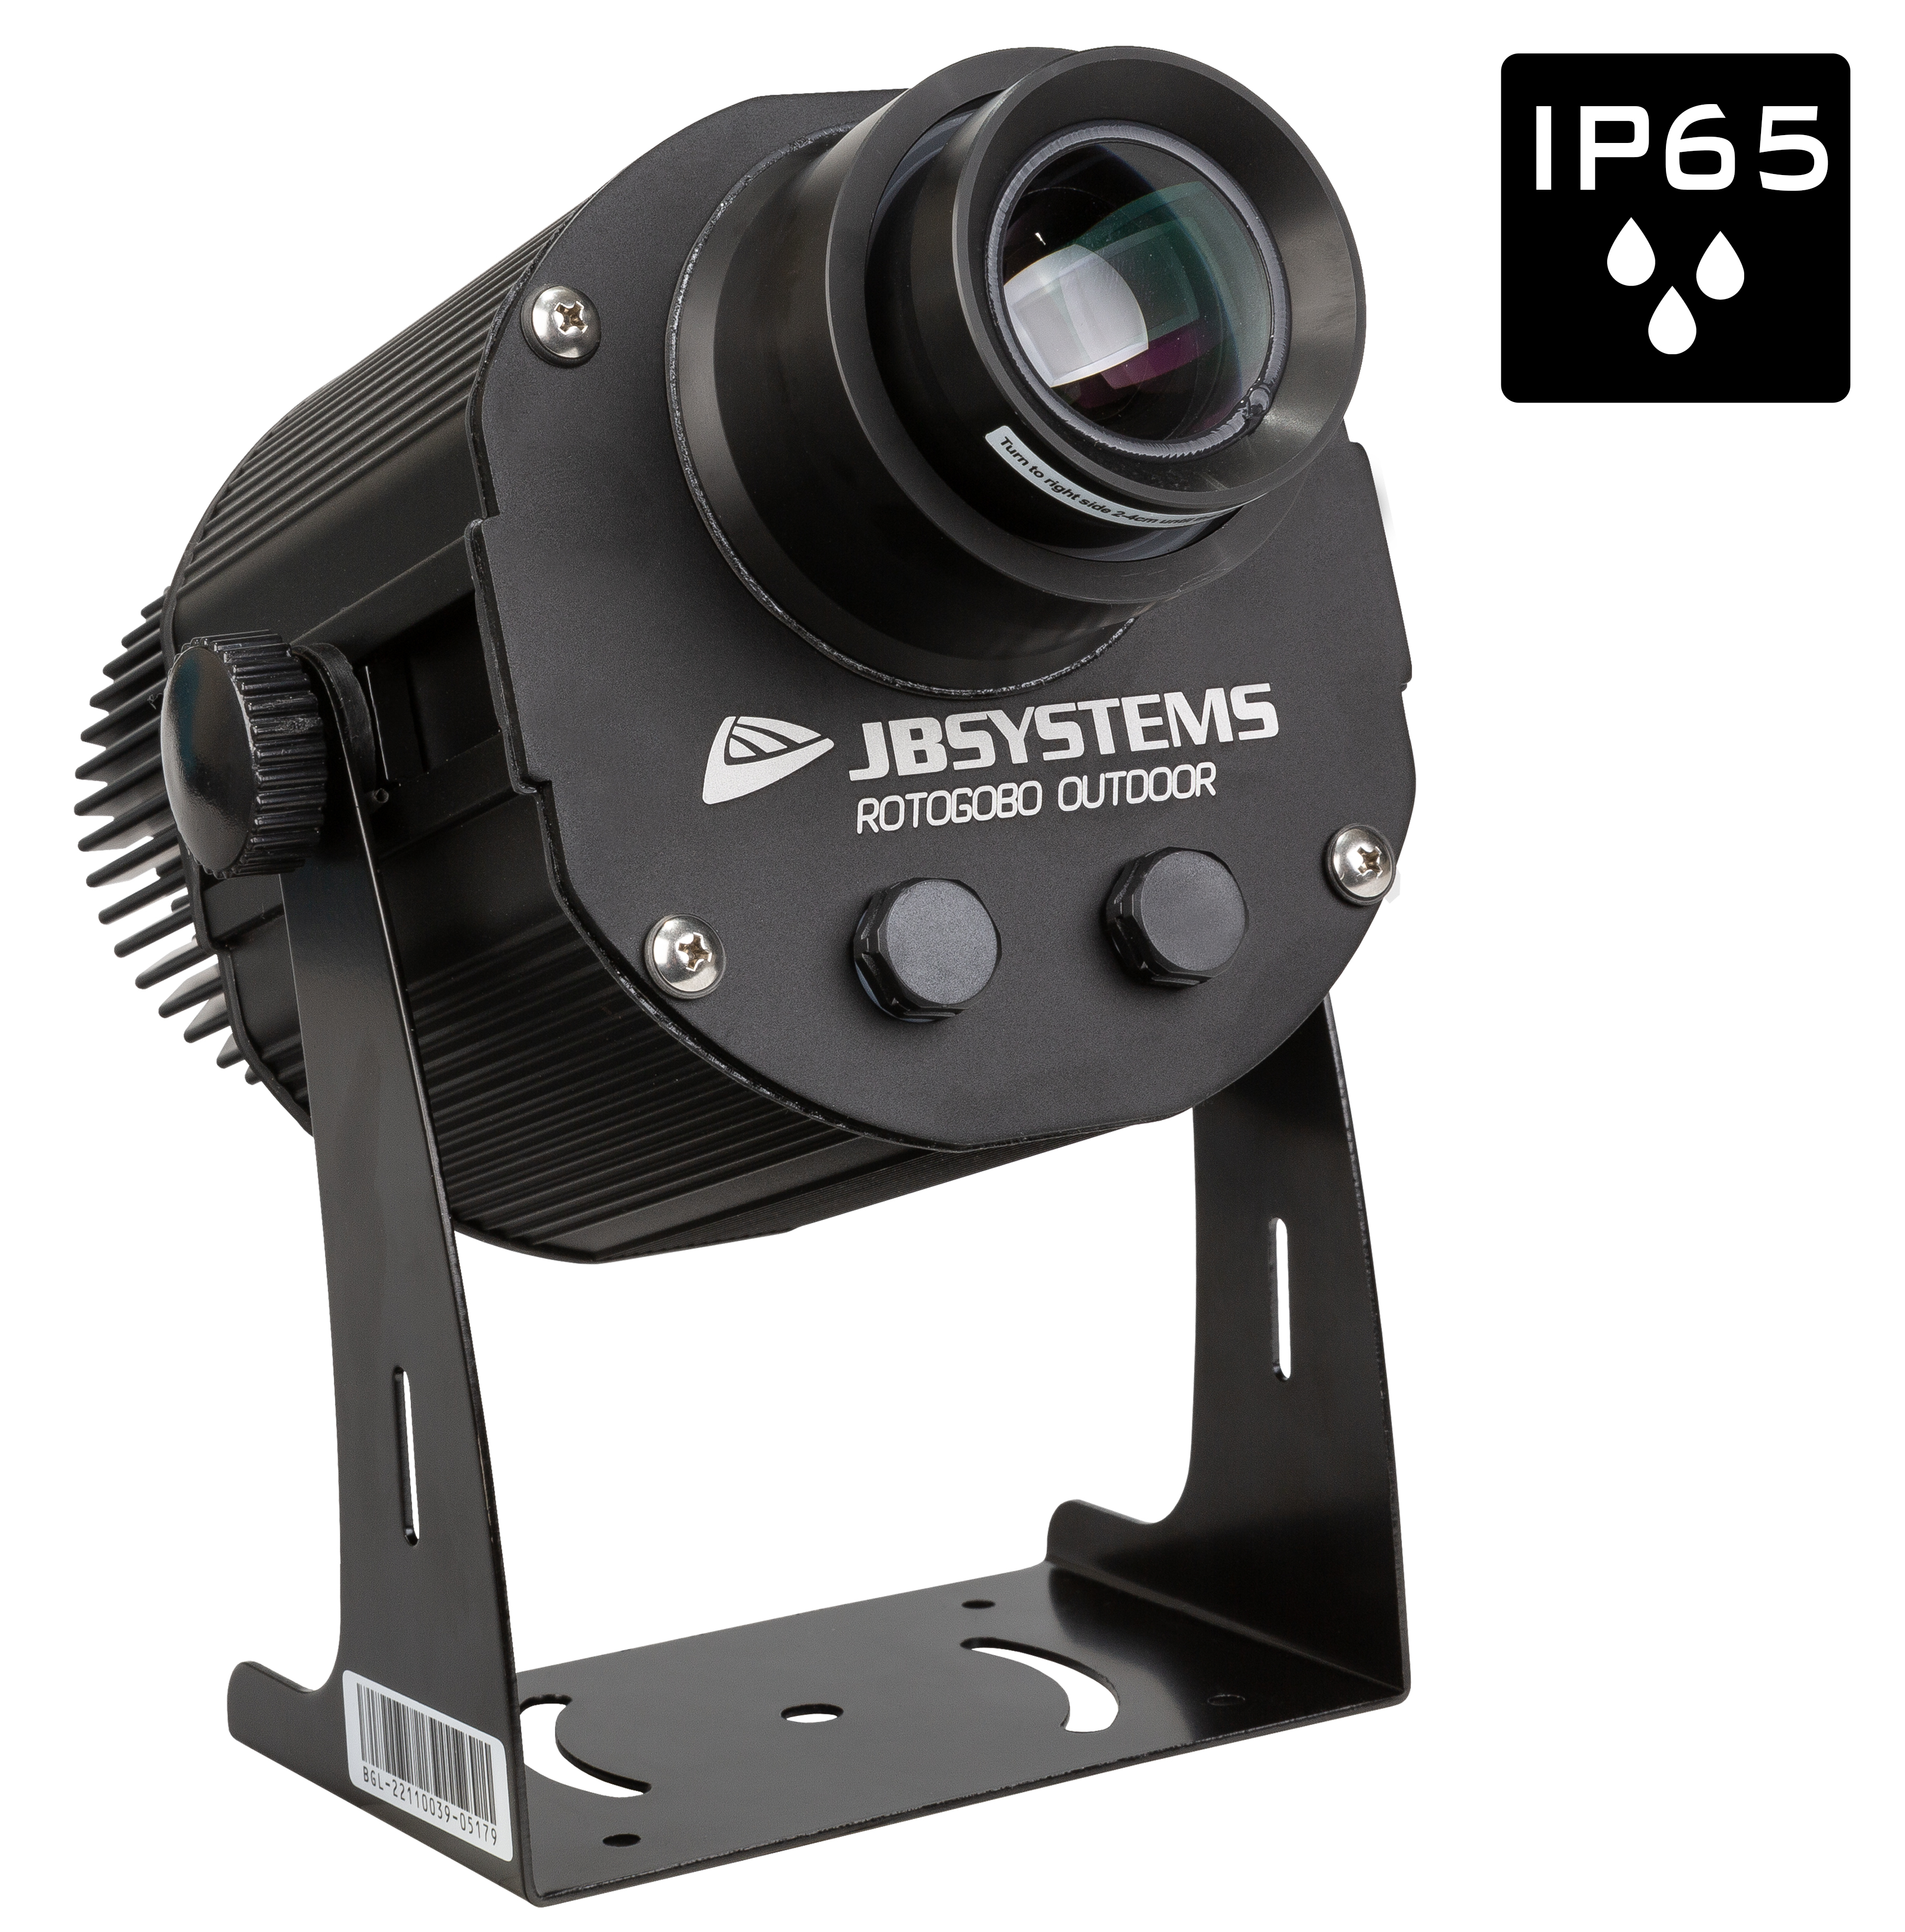 Powerful outdoor IP65 logo projector based on a 100W cold white LED